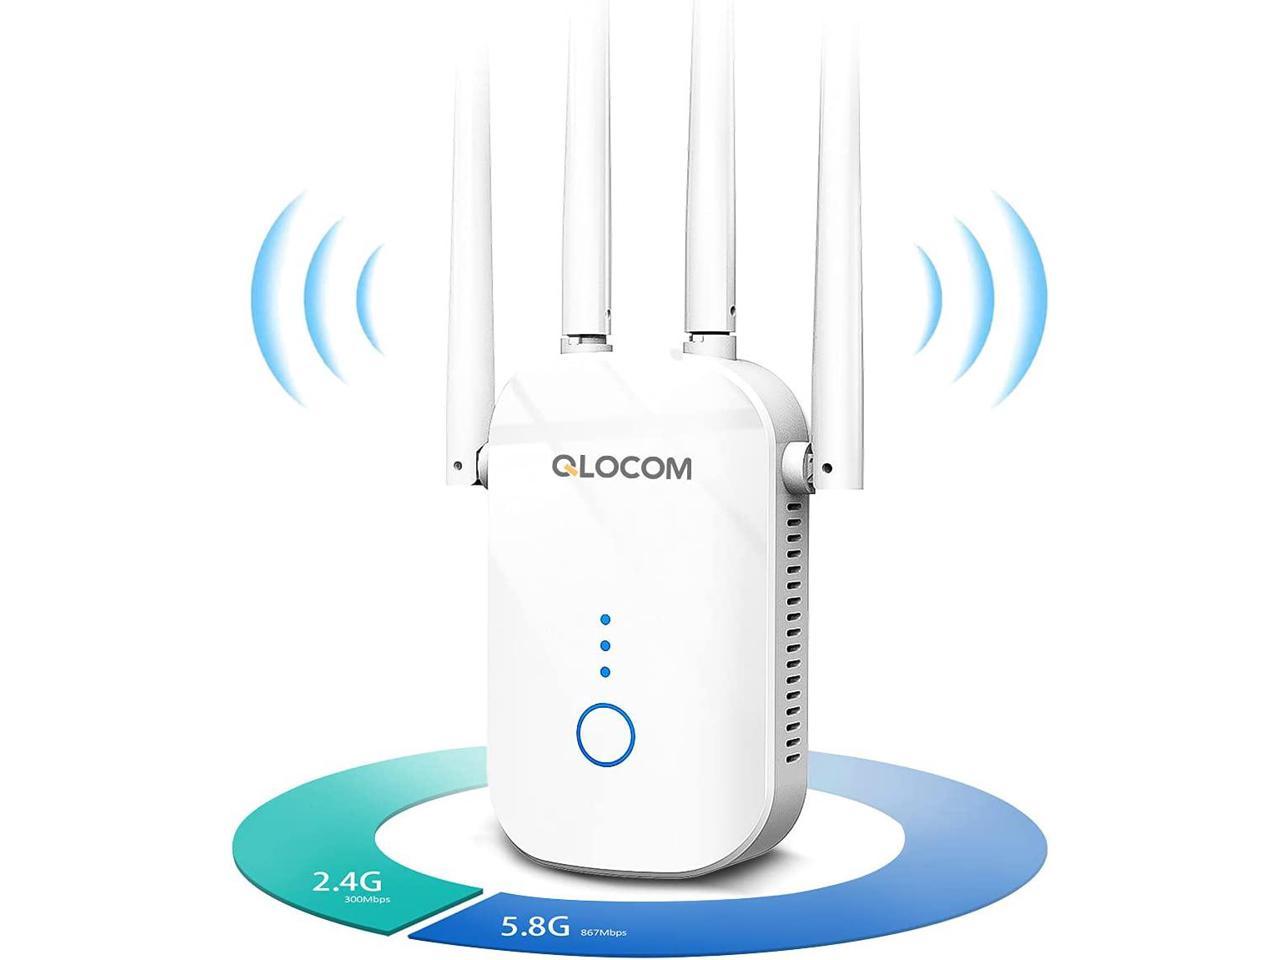 QLOCOM WiFi Extender Booster 1200Mbps Wireless Signal Booster Internet Range Booster for Home Dual 2.4G & 5GHz, Support Repeater/ Bridge/ AP/ Client/ Router Modes - Newegg.com